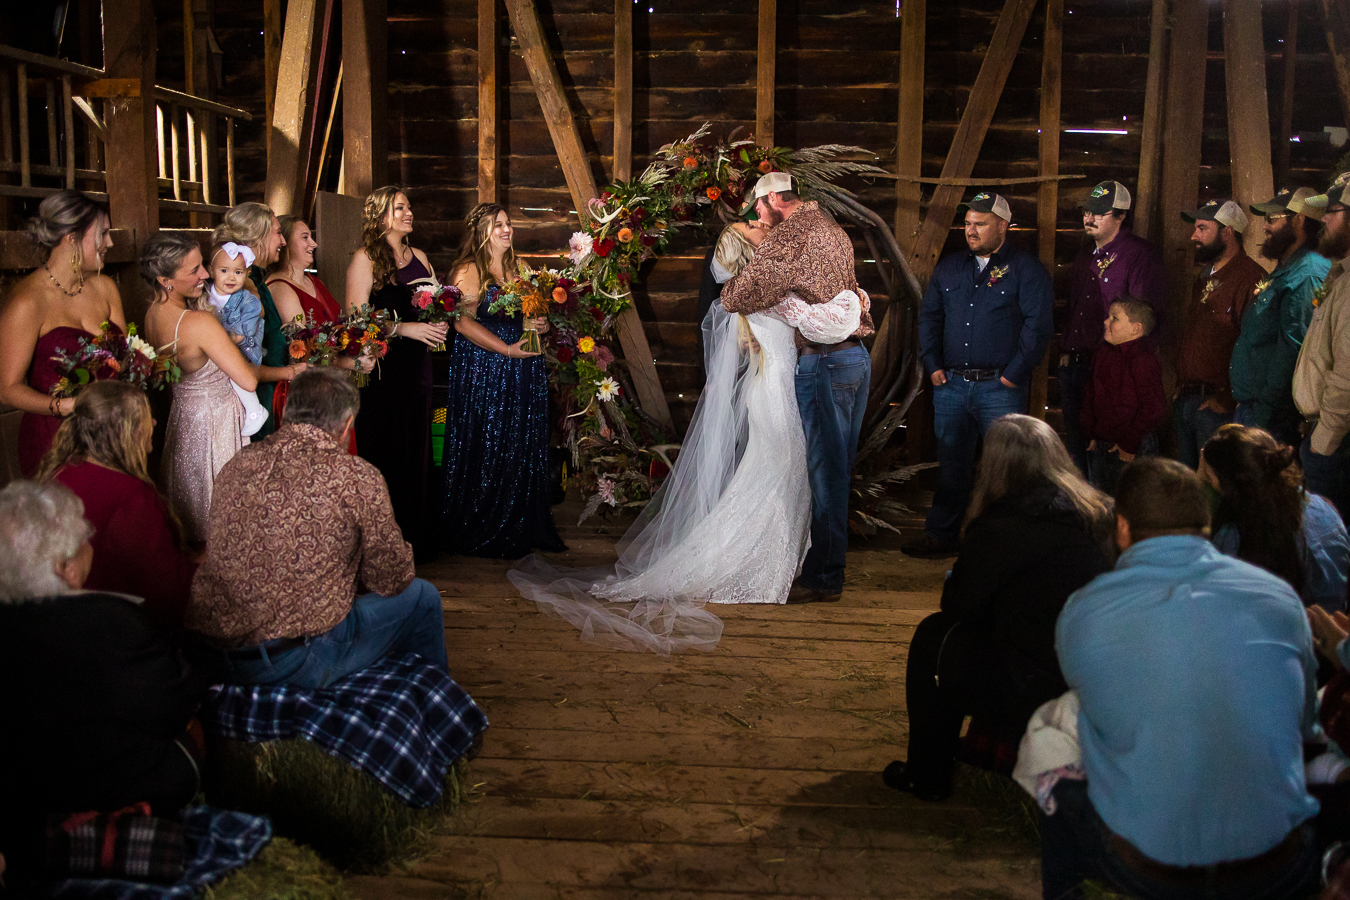 wild country wedding photographer, lisa rhinehart, captures the first kiss between husband and wife as they as surrounded by family and friends during this barn wedding ceremony in halifax pa 